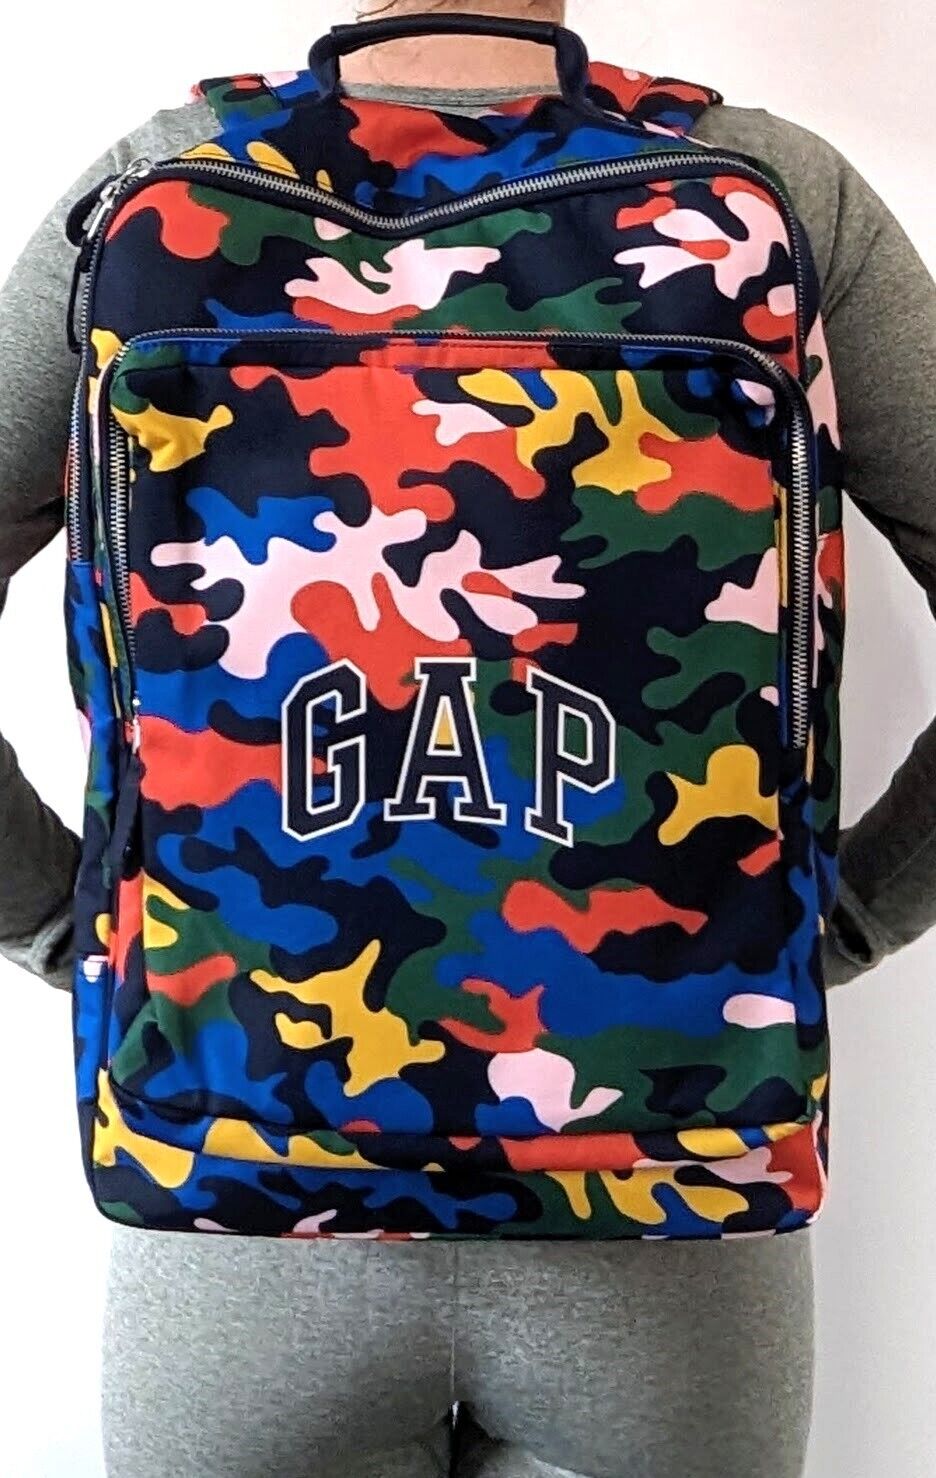 Gap Backpack Square New Camo Large RRP £65